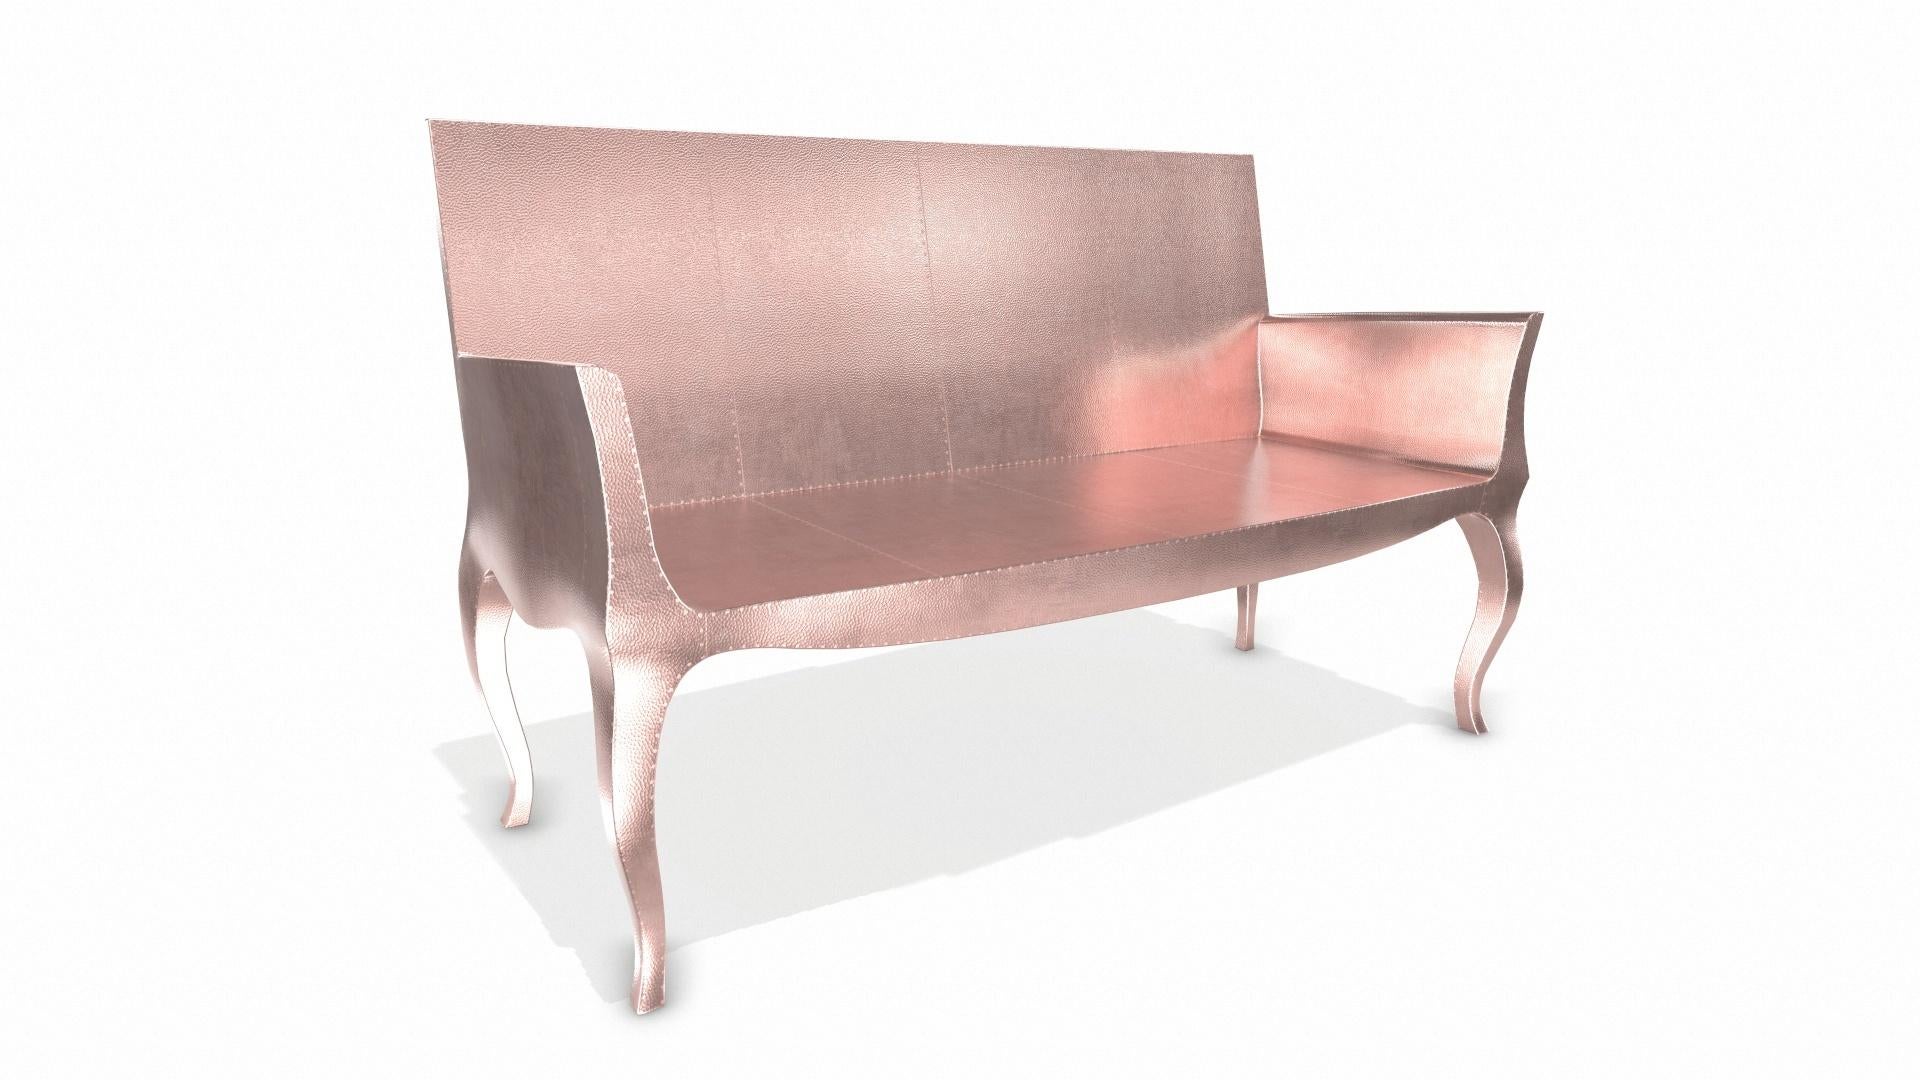 Contemporary Louise Settee Art Deco Daybeds in Mid. Hammered Copper by Paul Mathieu For Sale